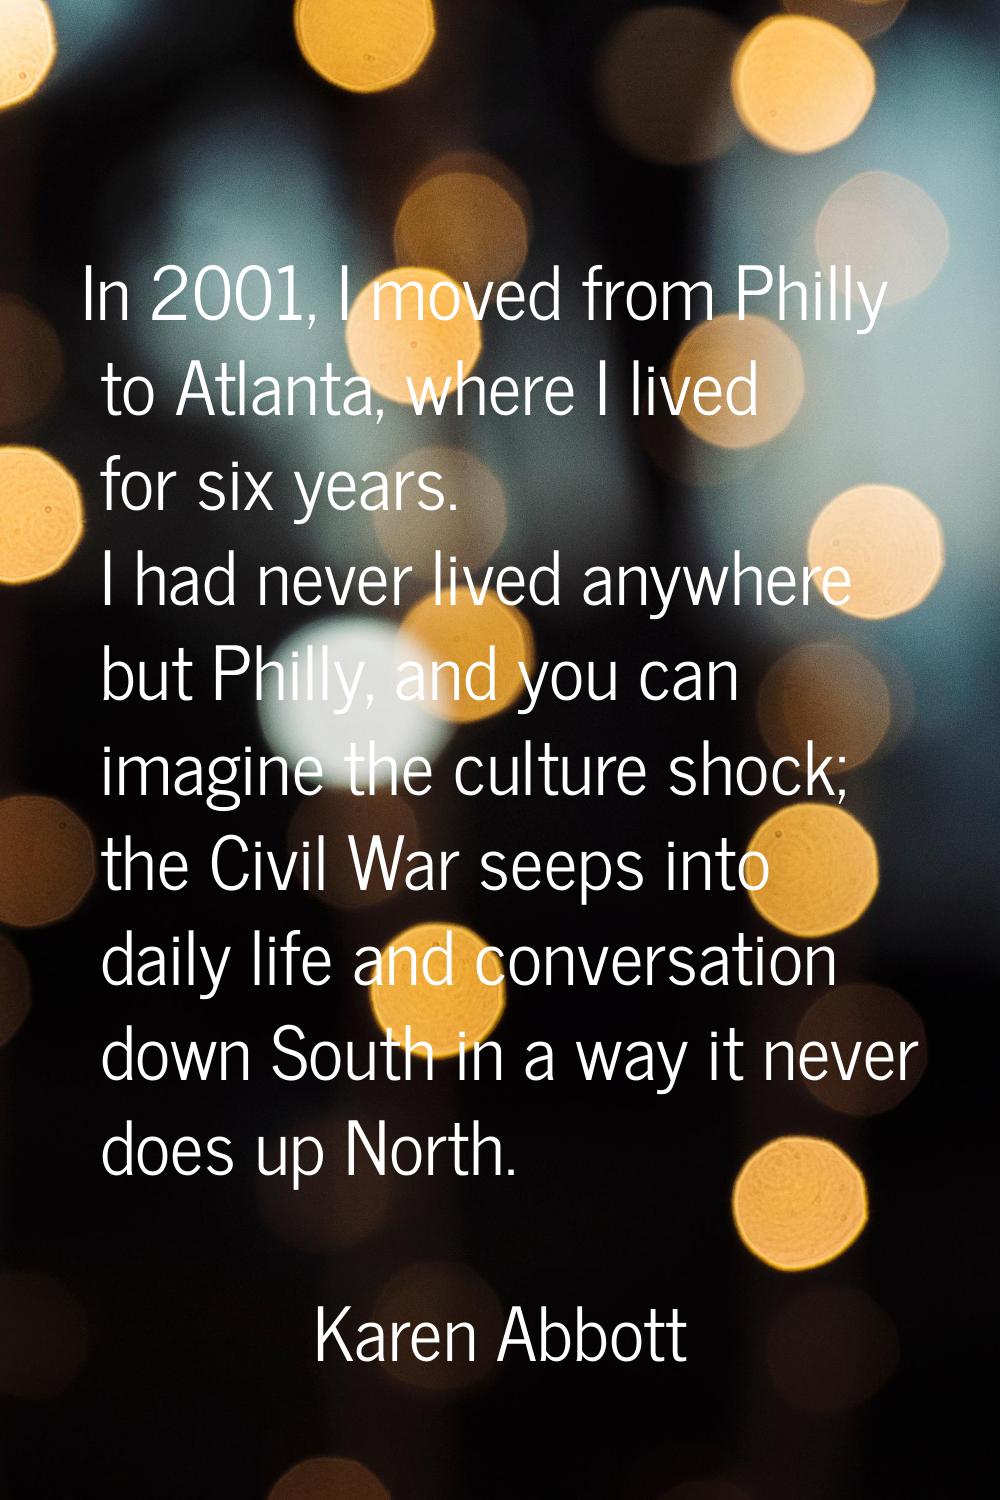 In 2001, I moved from Philly to Atlanta, where I lived for six years. I had never lived anywhere bu